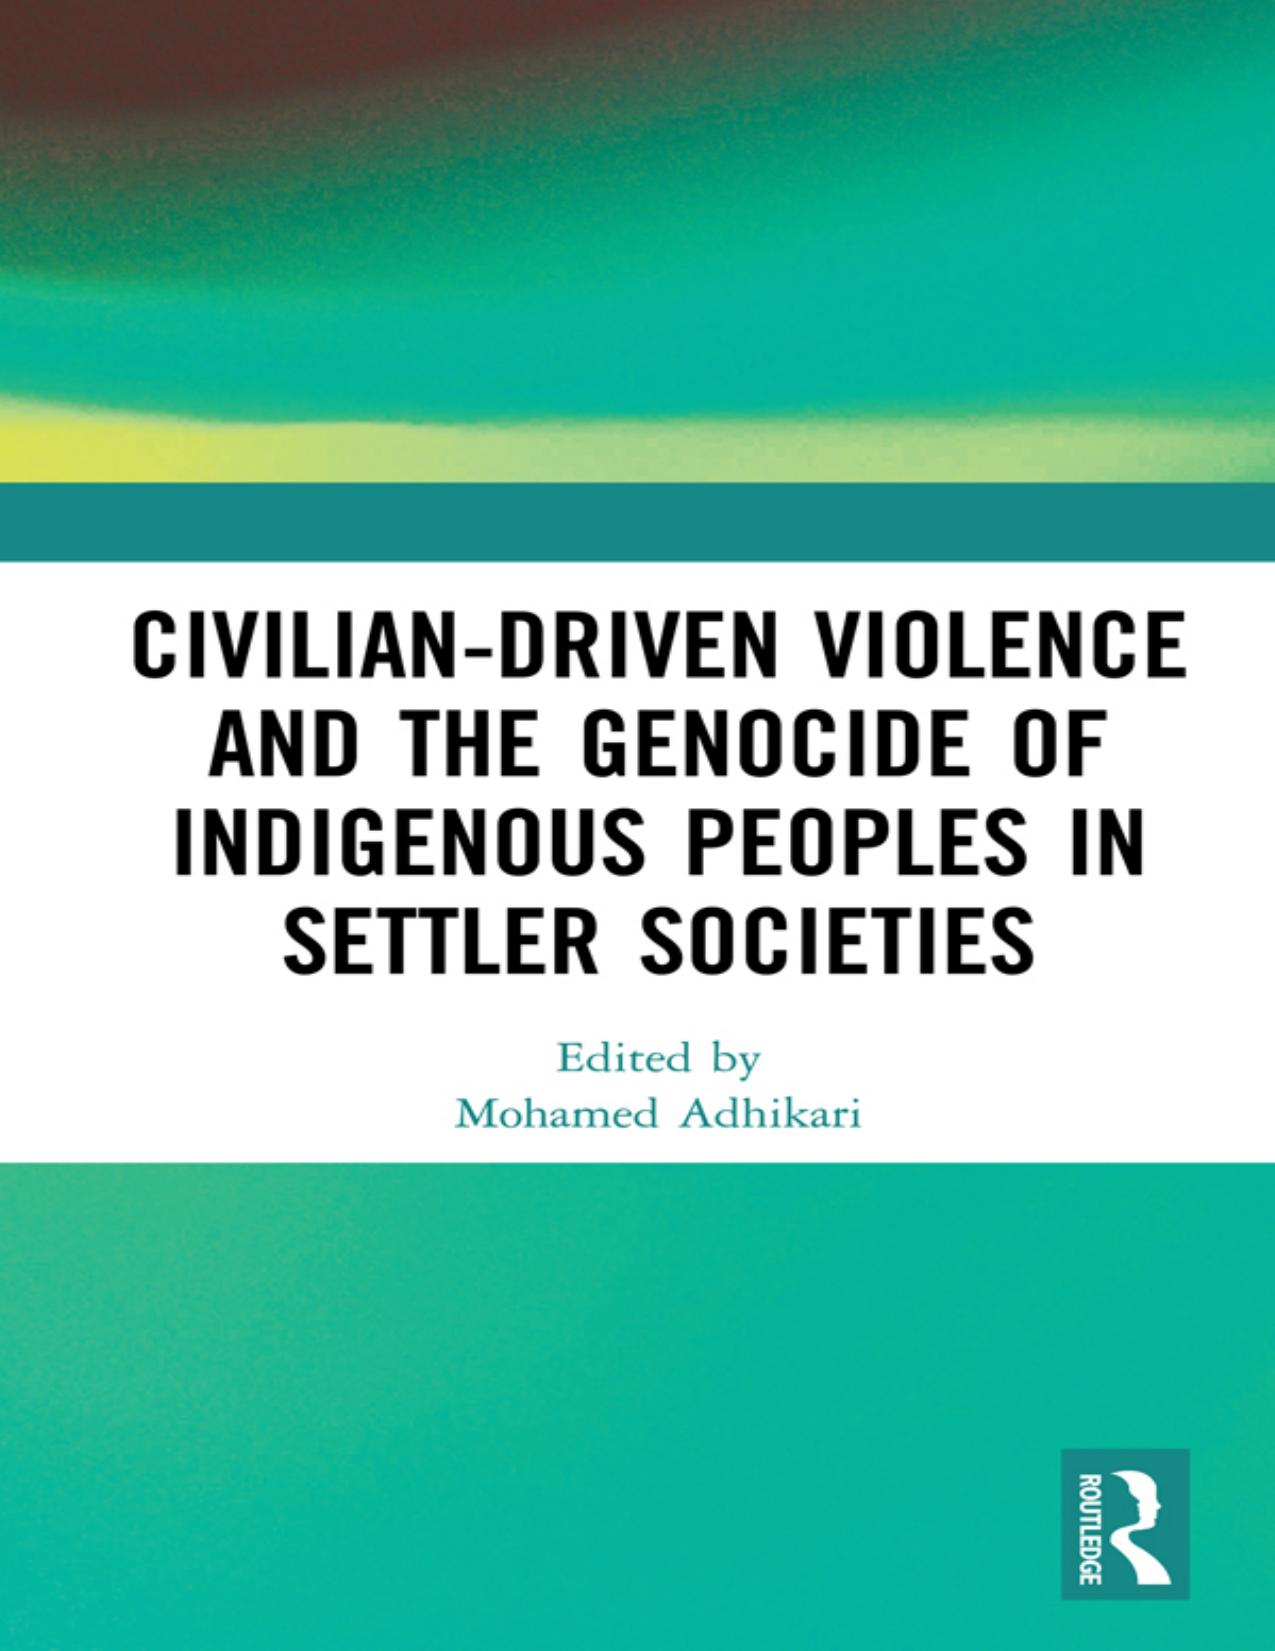 Civilian-Driven Violence and the Genocide of Indigenous Peoples in Settler Societies by Mohamed Adhikari